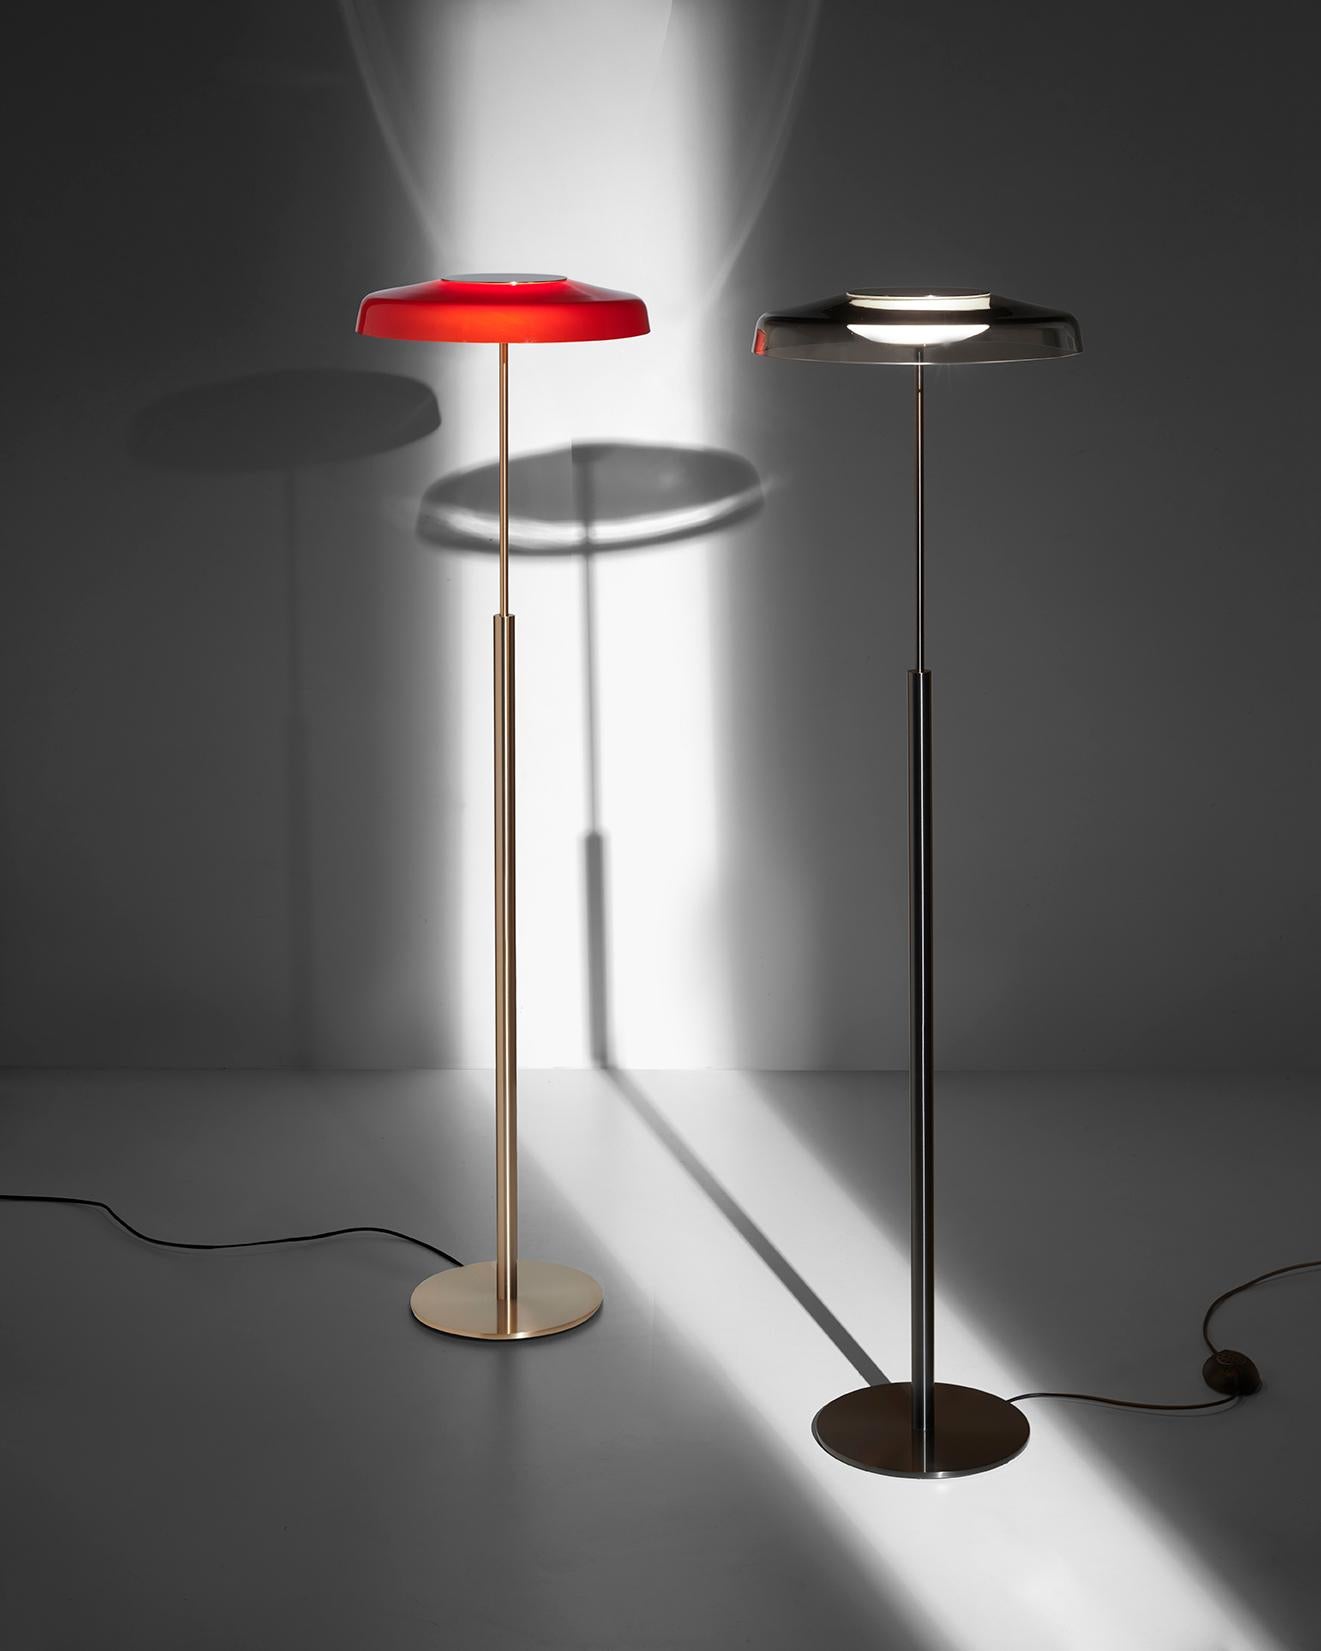 A balanced and refined presence, distinctive but not ostentatious.
Dora is a family of lamps based on the contrast between the warmth of the glass diffuser and the sobriety of the metal body that supports it. The strong references to classical